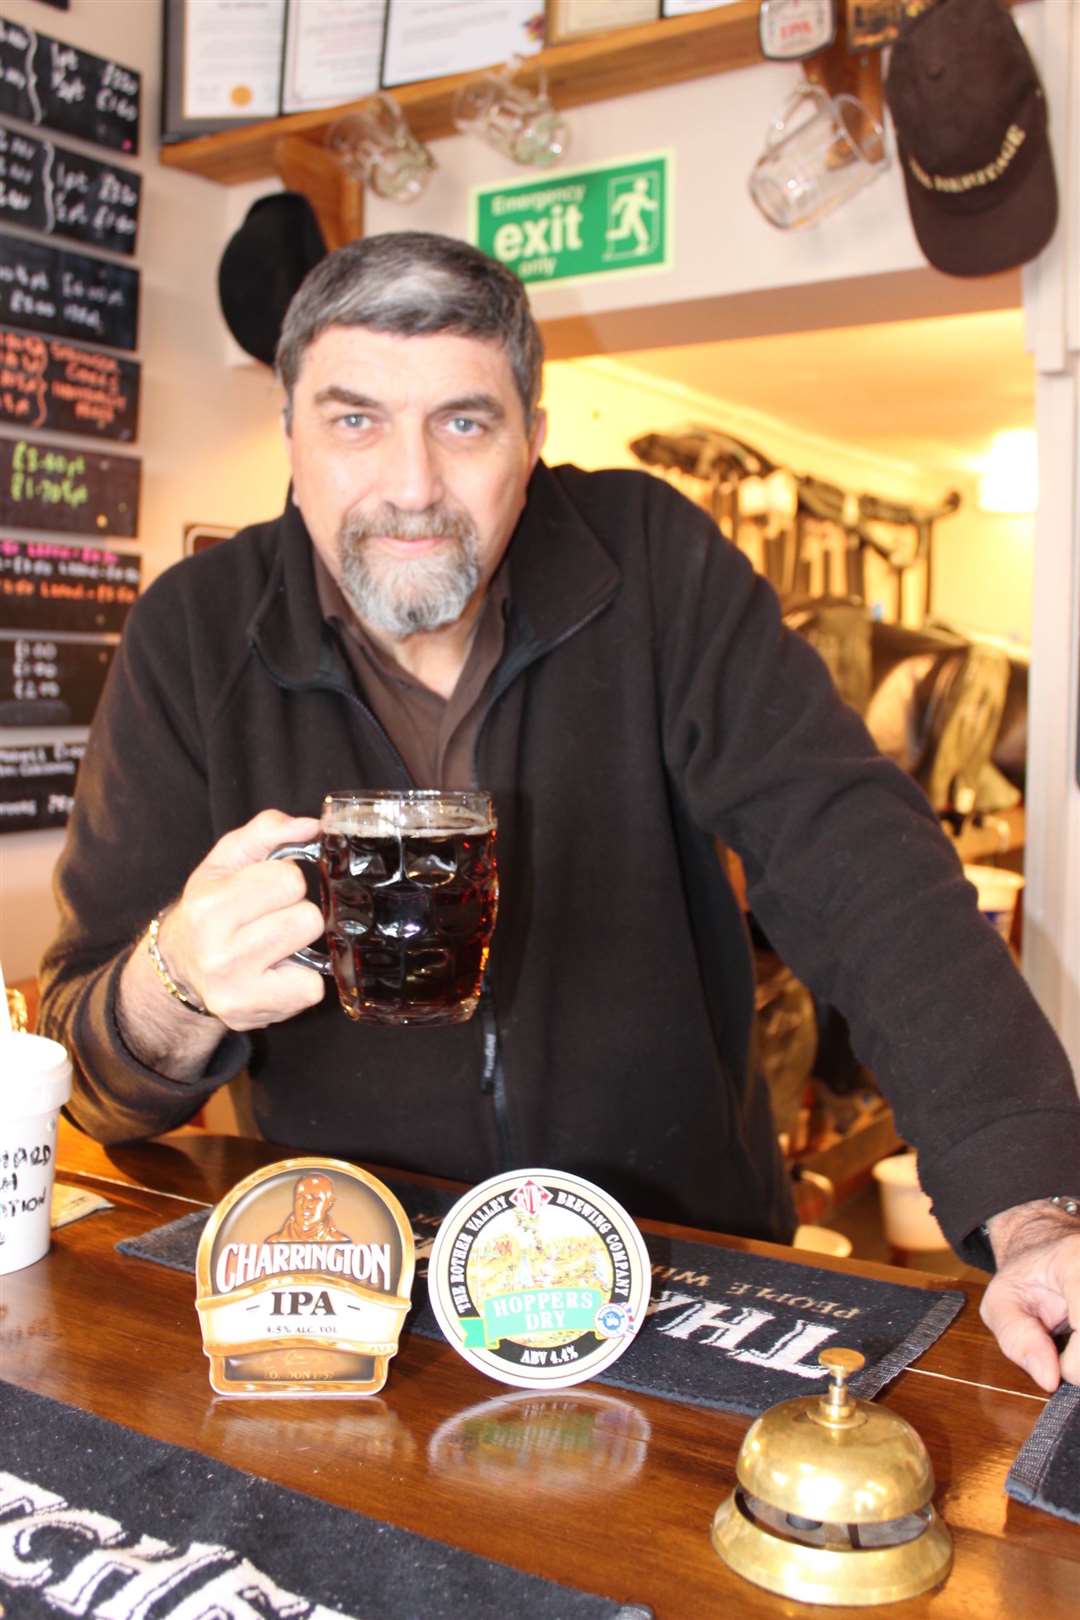 Melvin Hopper who owns The Heritage and AYs Man micropubs on the Isle of Sheppey